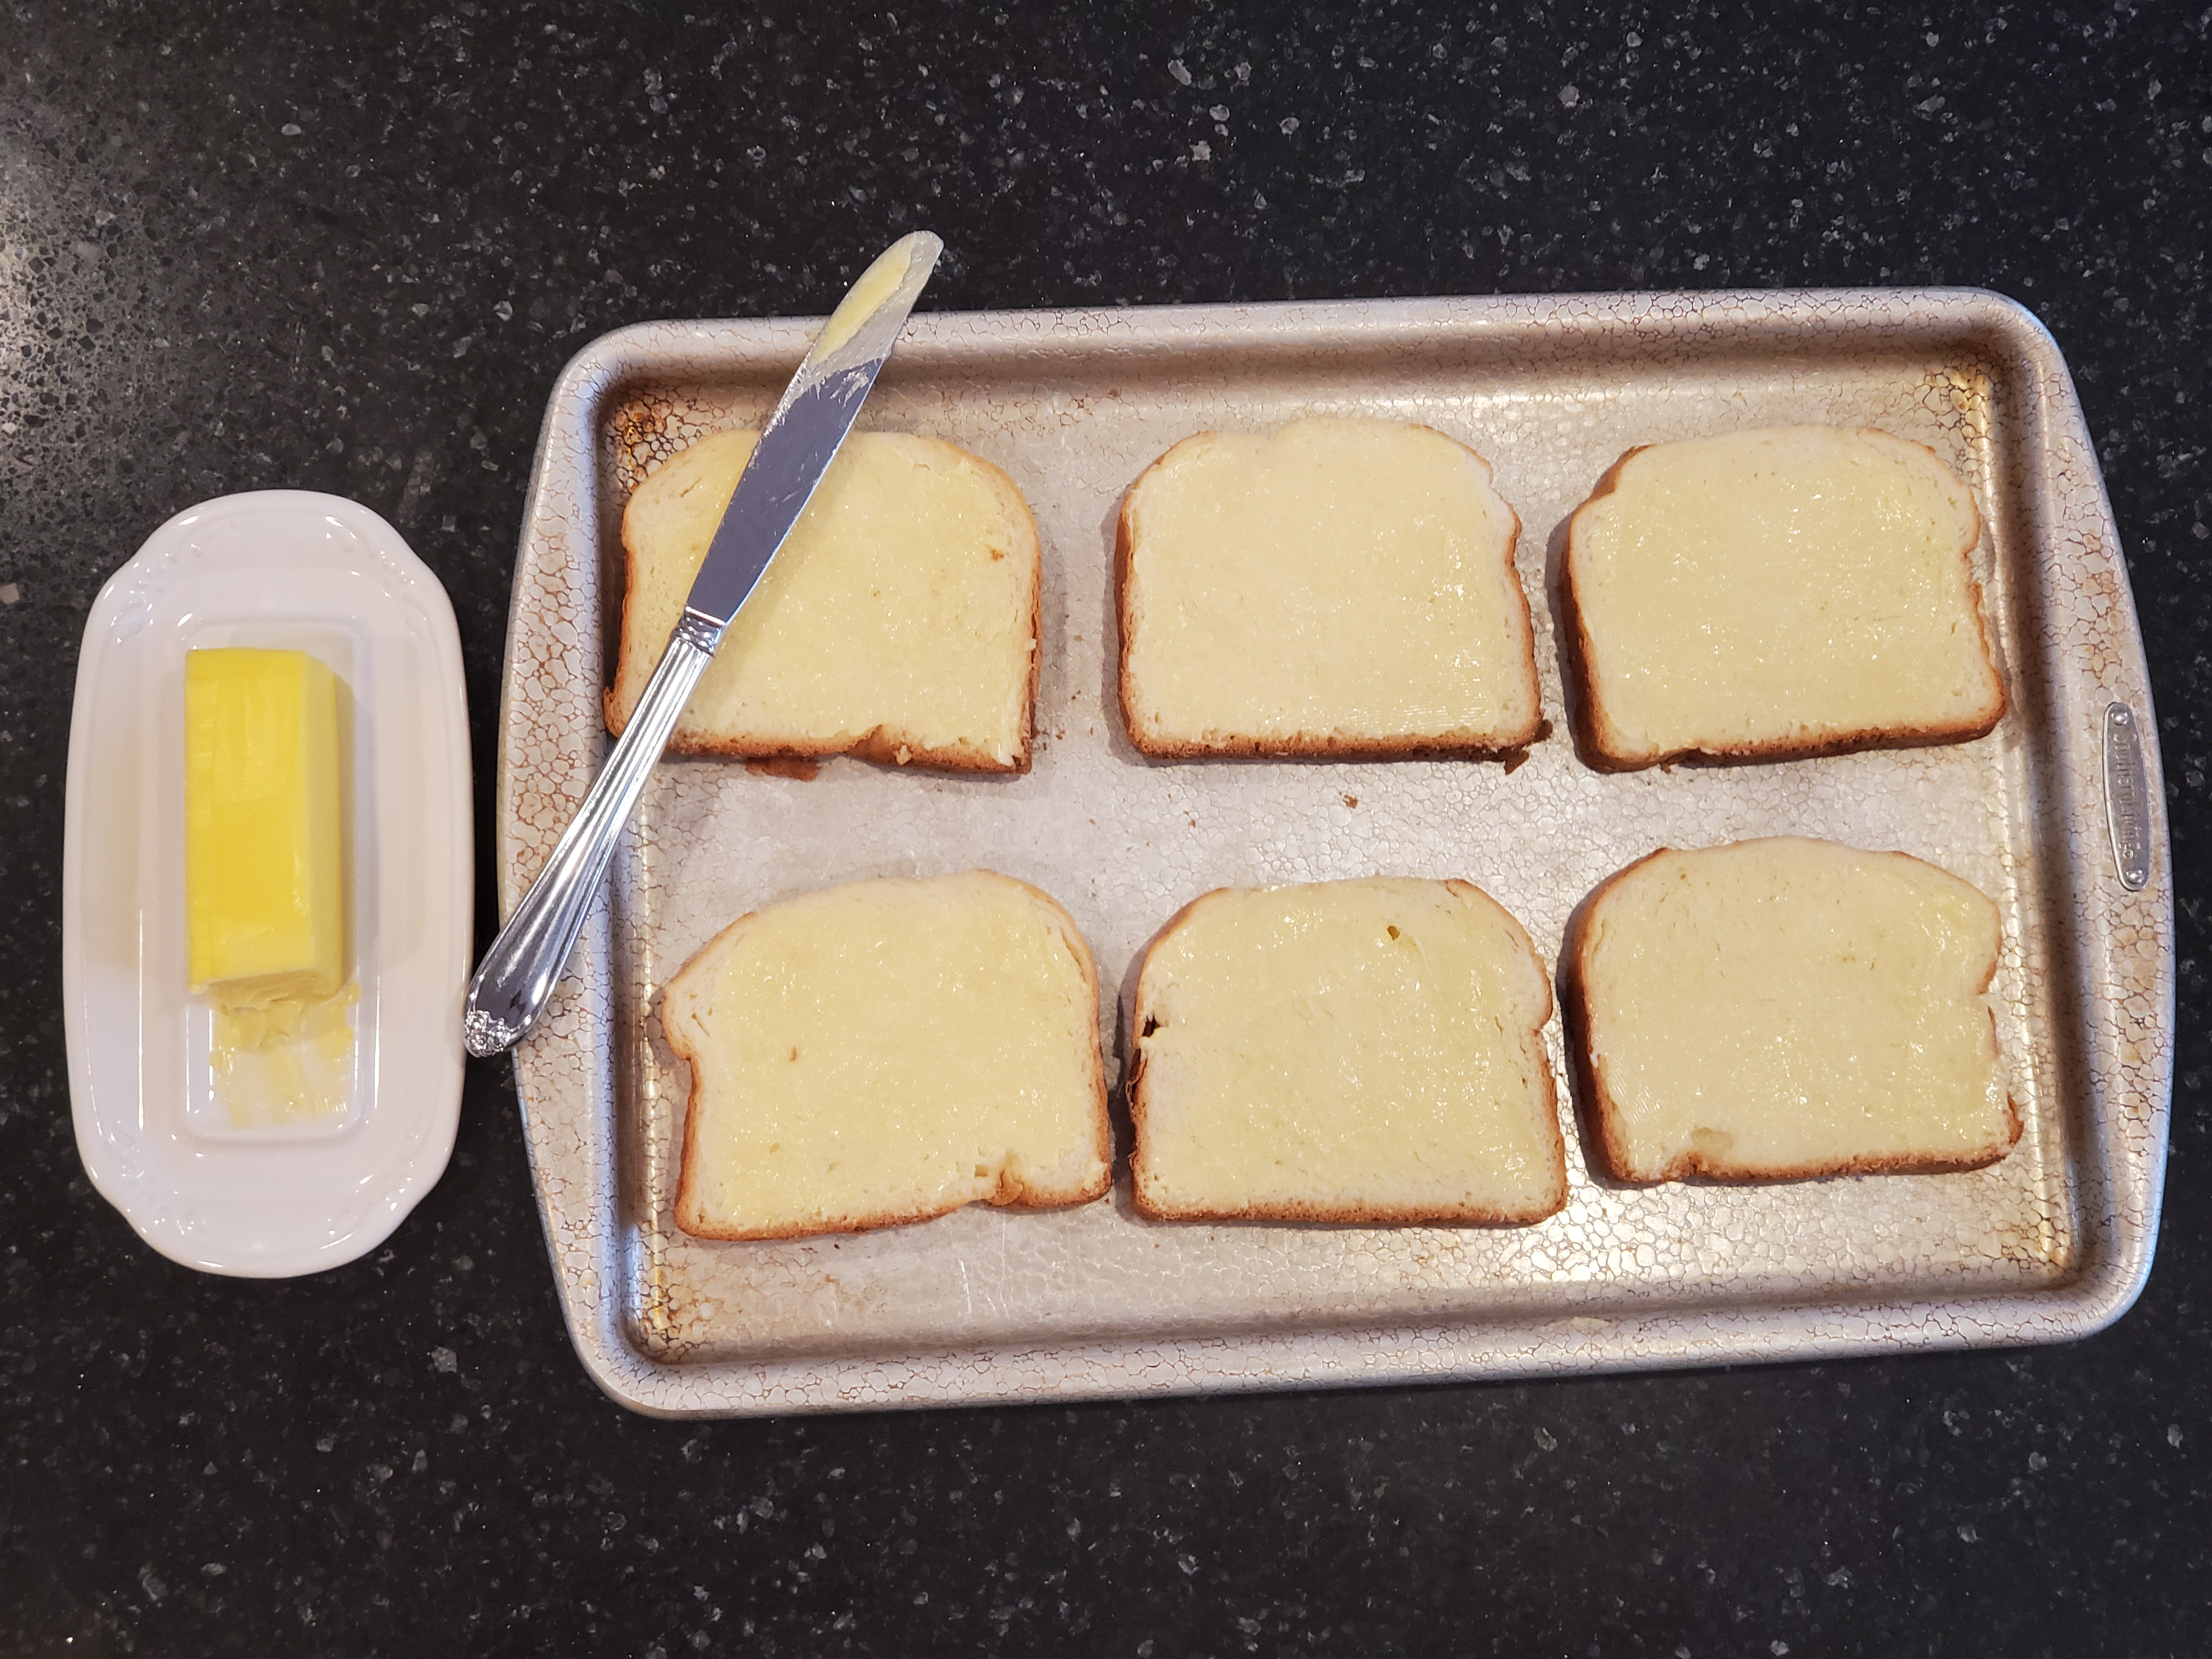 Six slices of brioche sit on a baking sheet buttered, a dish with softened butter and a butter knife sit beside. All on a black granite countertop.